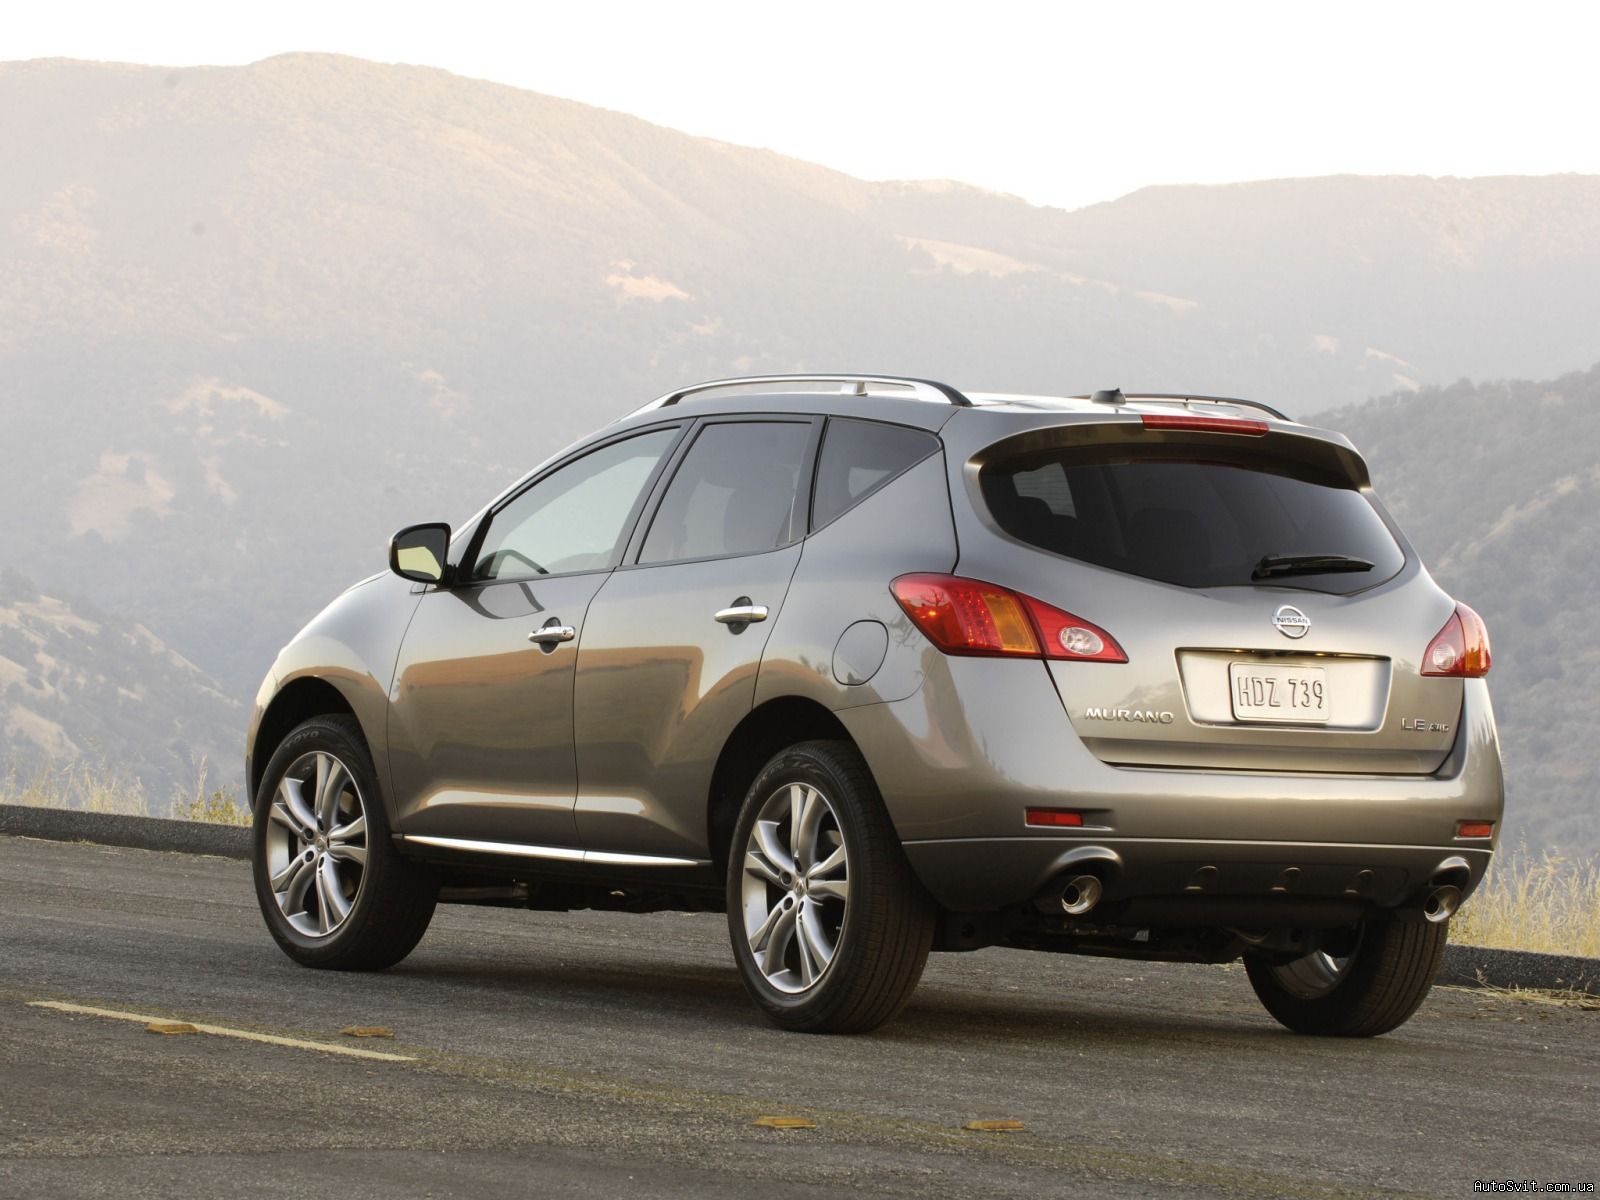 top cars: 2008 Nissan Murano, specs, transmission, review